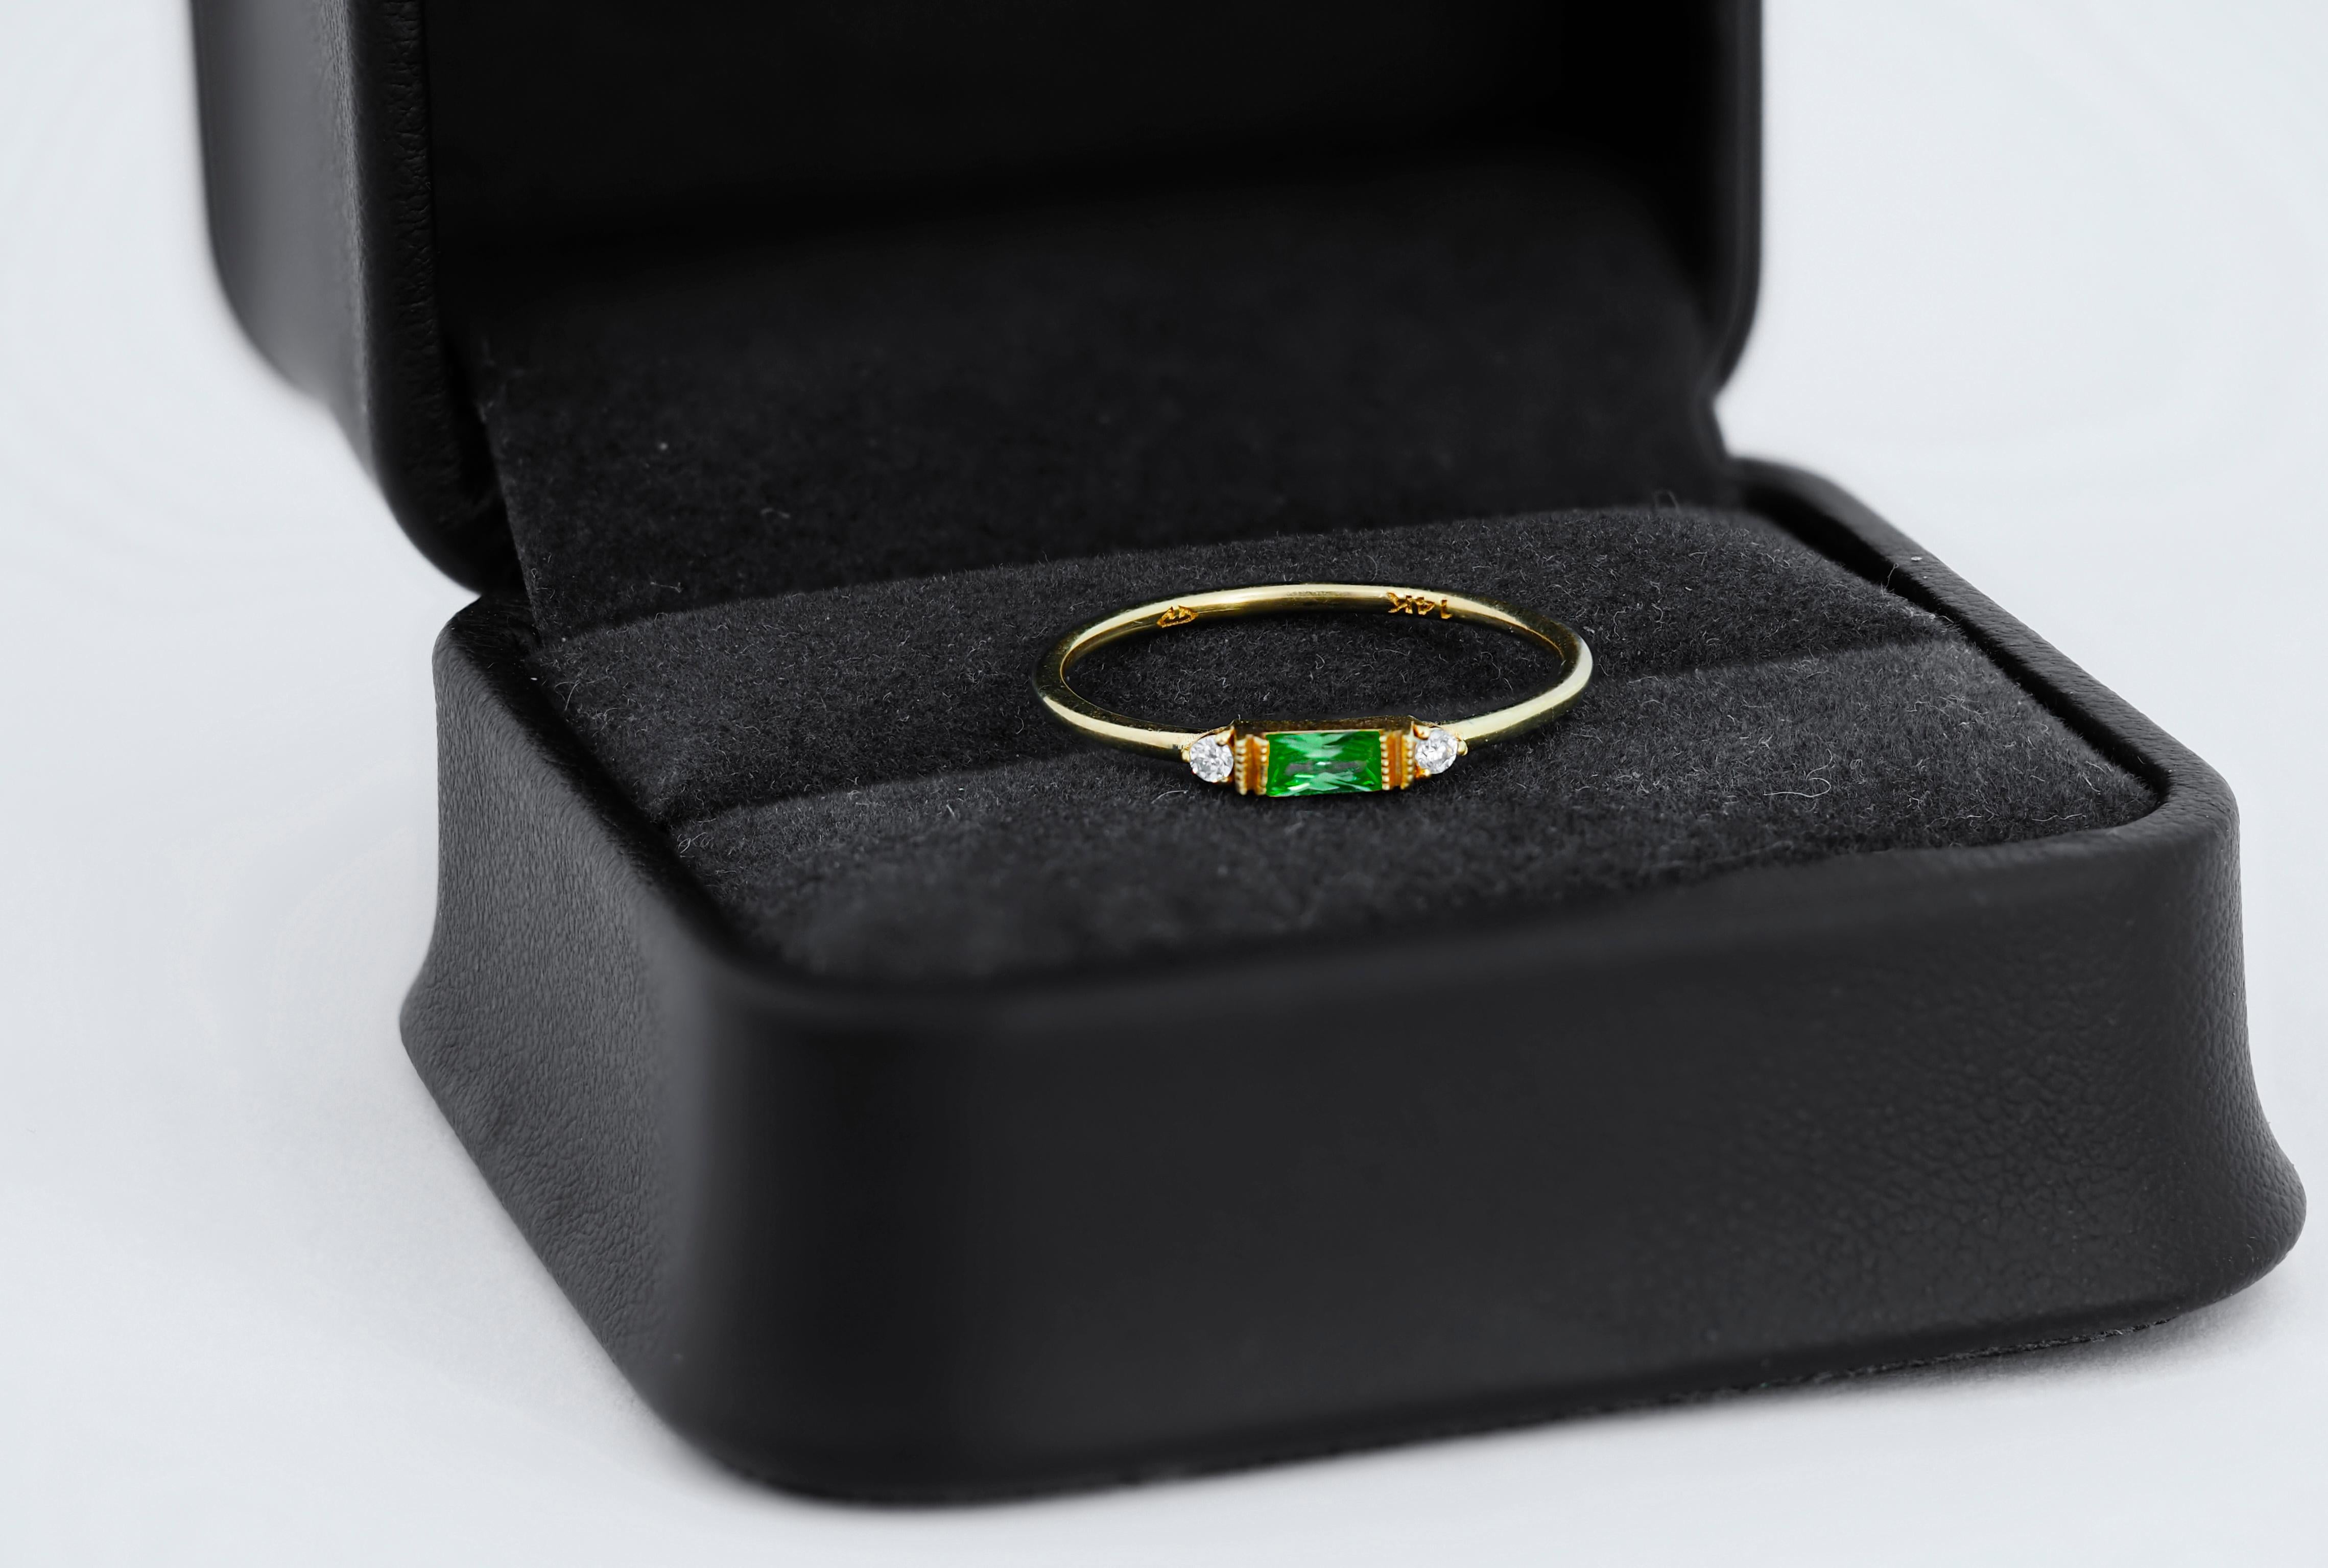 East west Baguette Cut Green Gemstone Engagement 14k gold Ring. Lab Emerald Ring. Baguette Emerald Ring. 14k Solid Gold Minimalist Green Emerald Ring. Stacking Emerald and Moissanite Ring. Minimalist Ring. Simple Emerald Ring. May birthstone